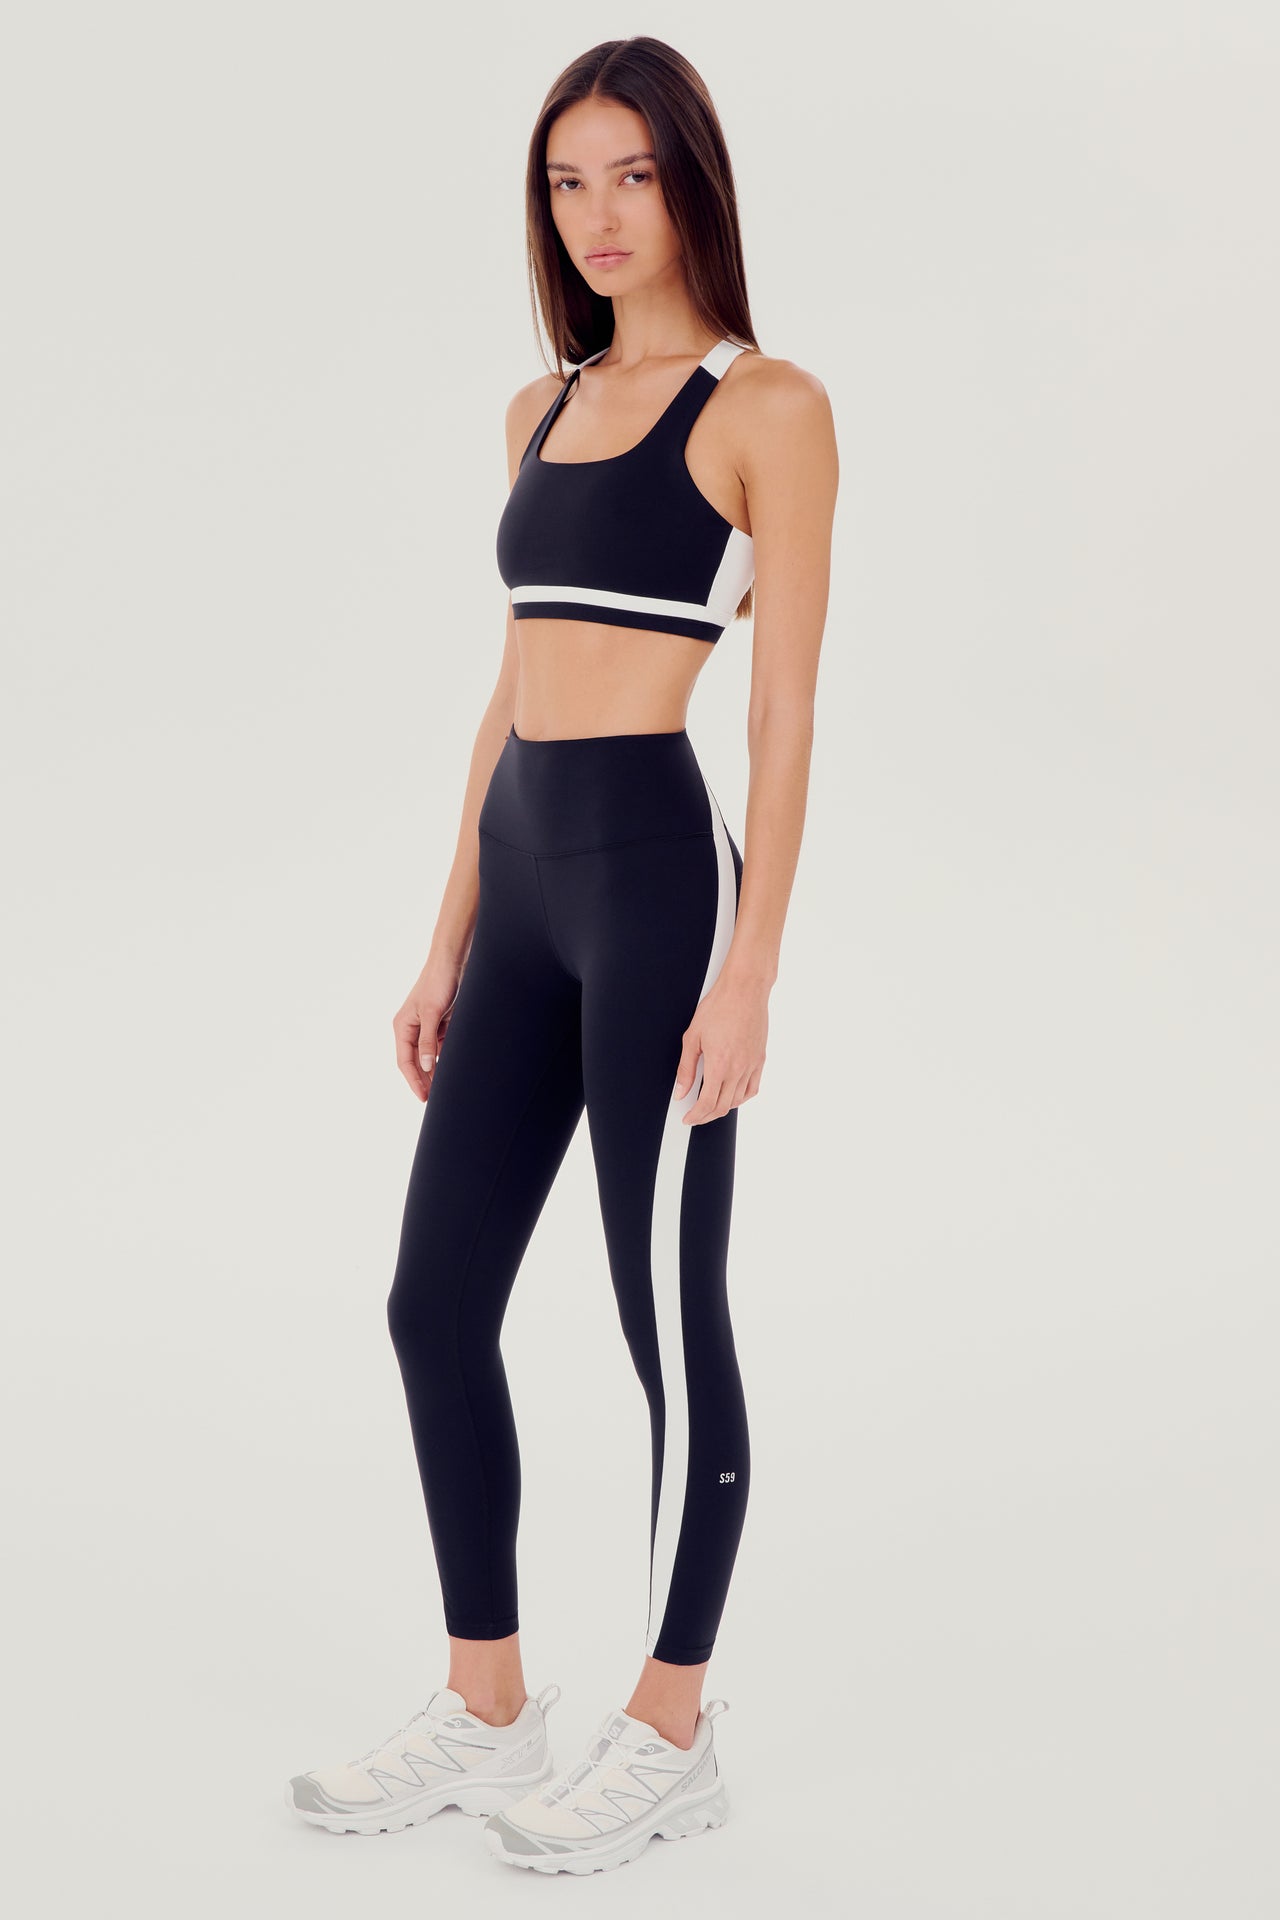 A woman wearing a SPLITS59 Miles Rigor Bra in Black/White with support and leggings, perfect for workouts.